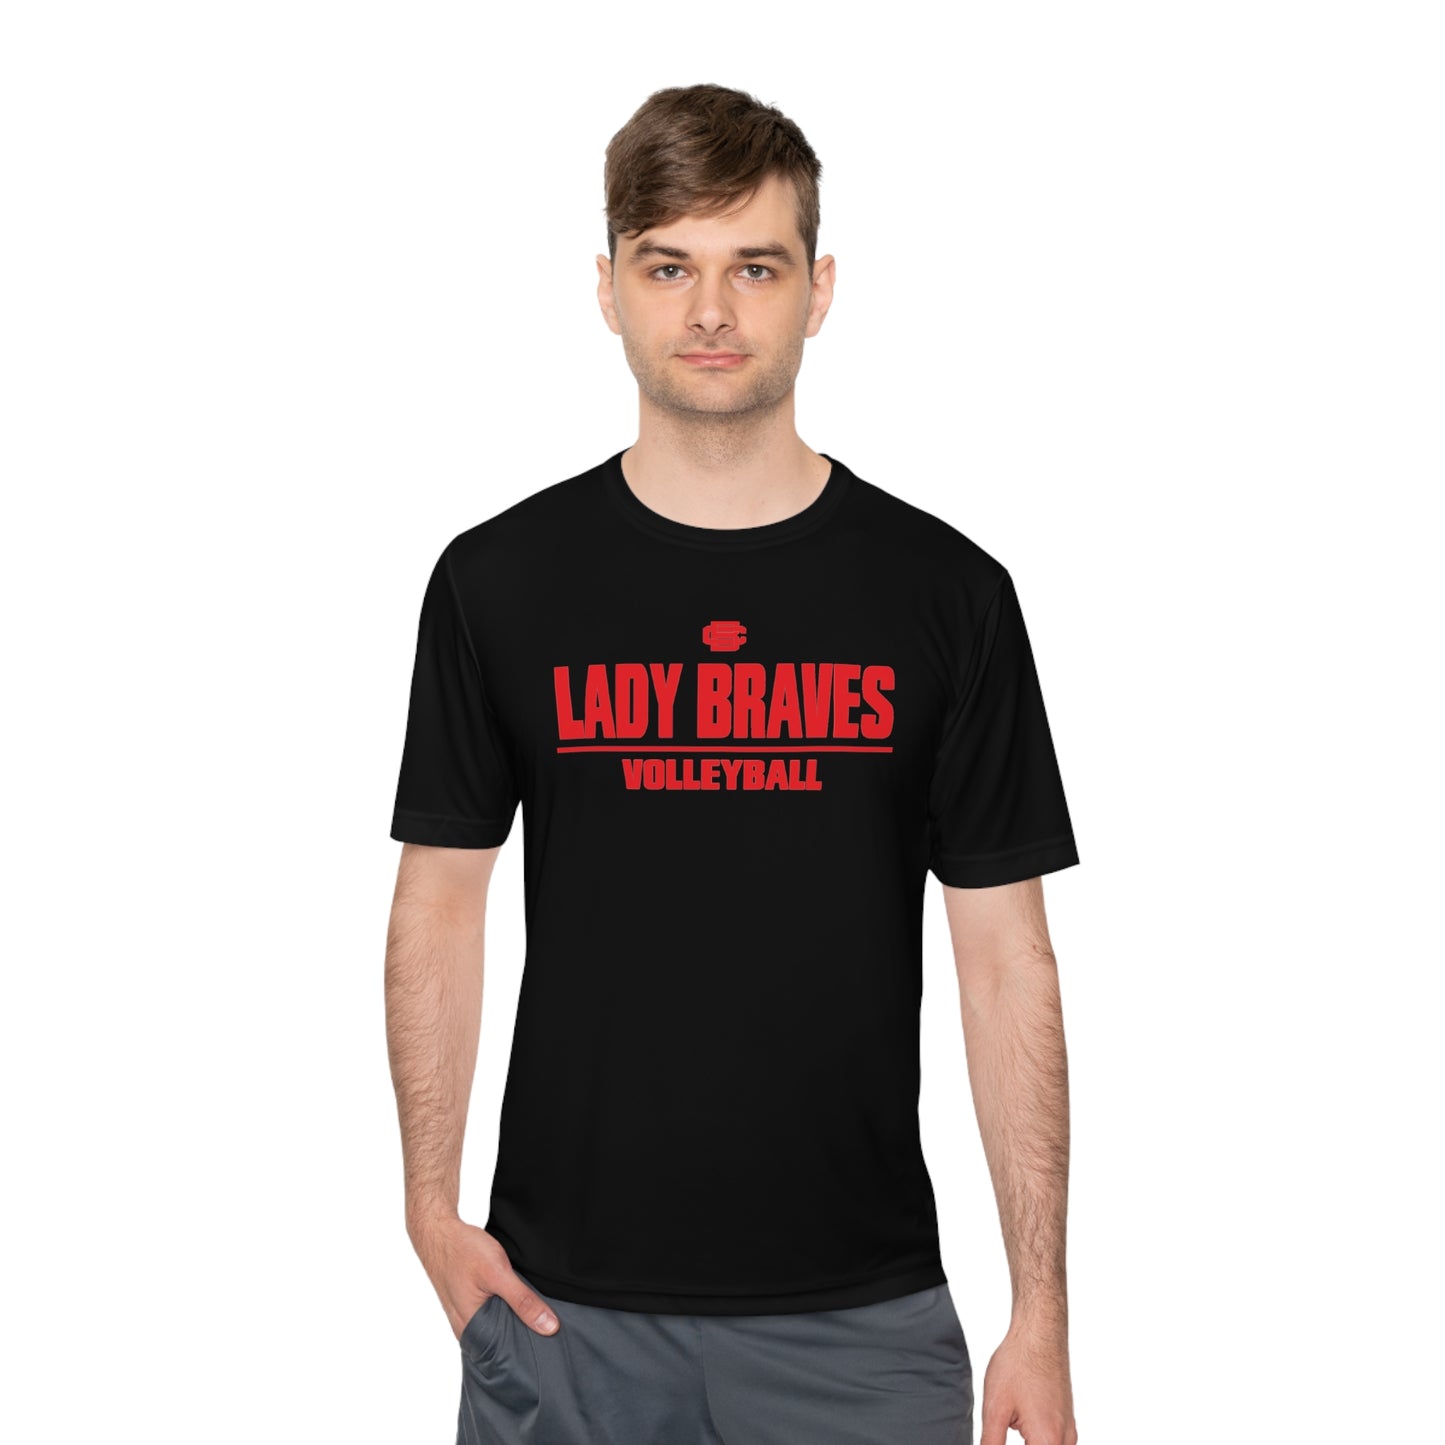 Lady Braves Volleyball Moisture Wicking Tee